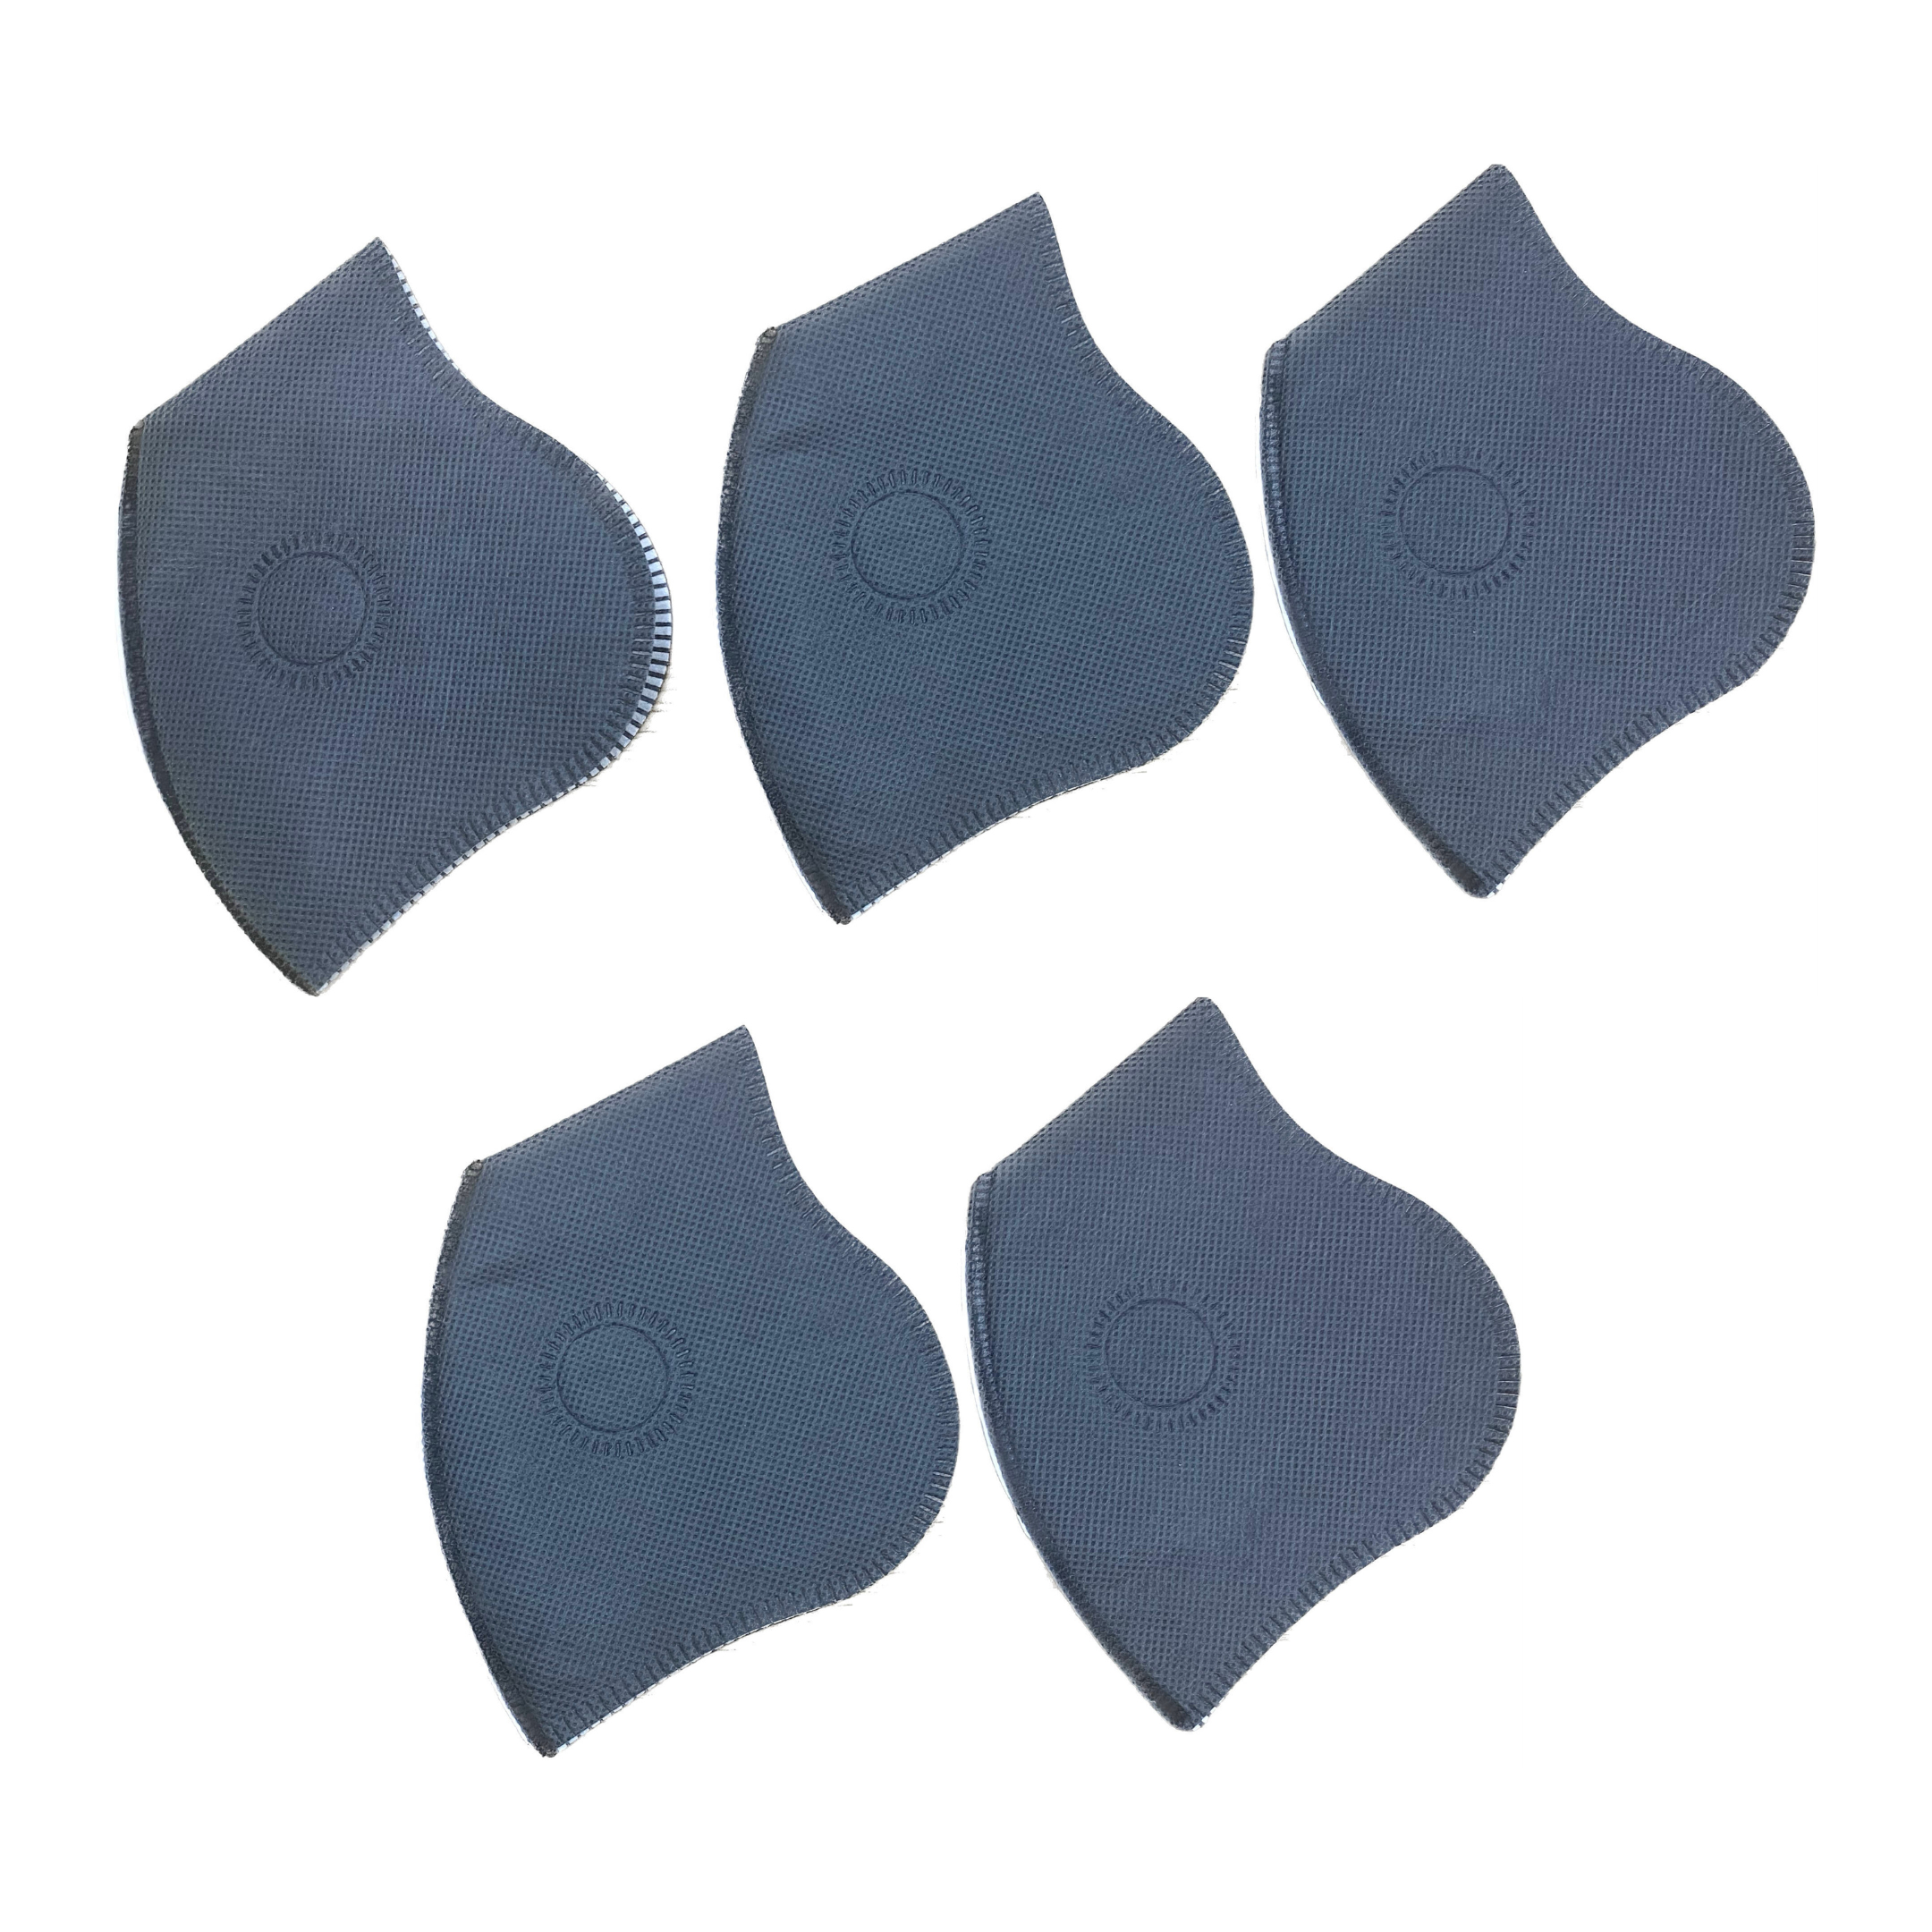 Replacement Filters for Black Dust Masks - Pack of 5